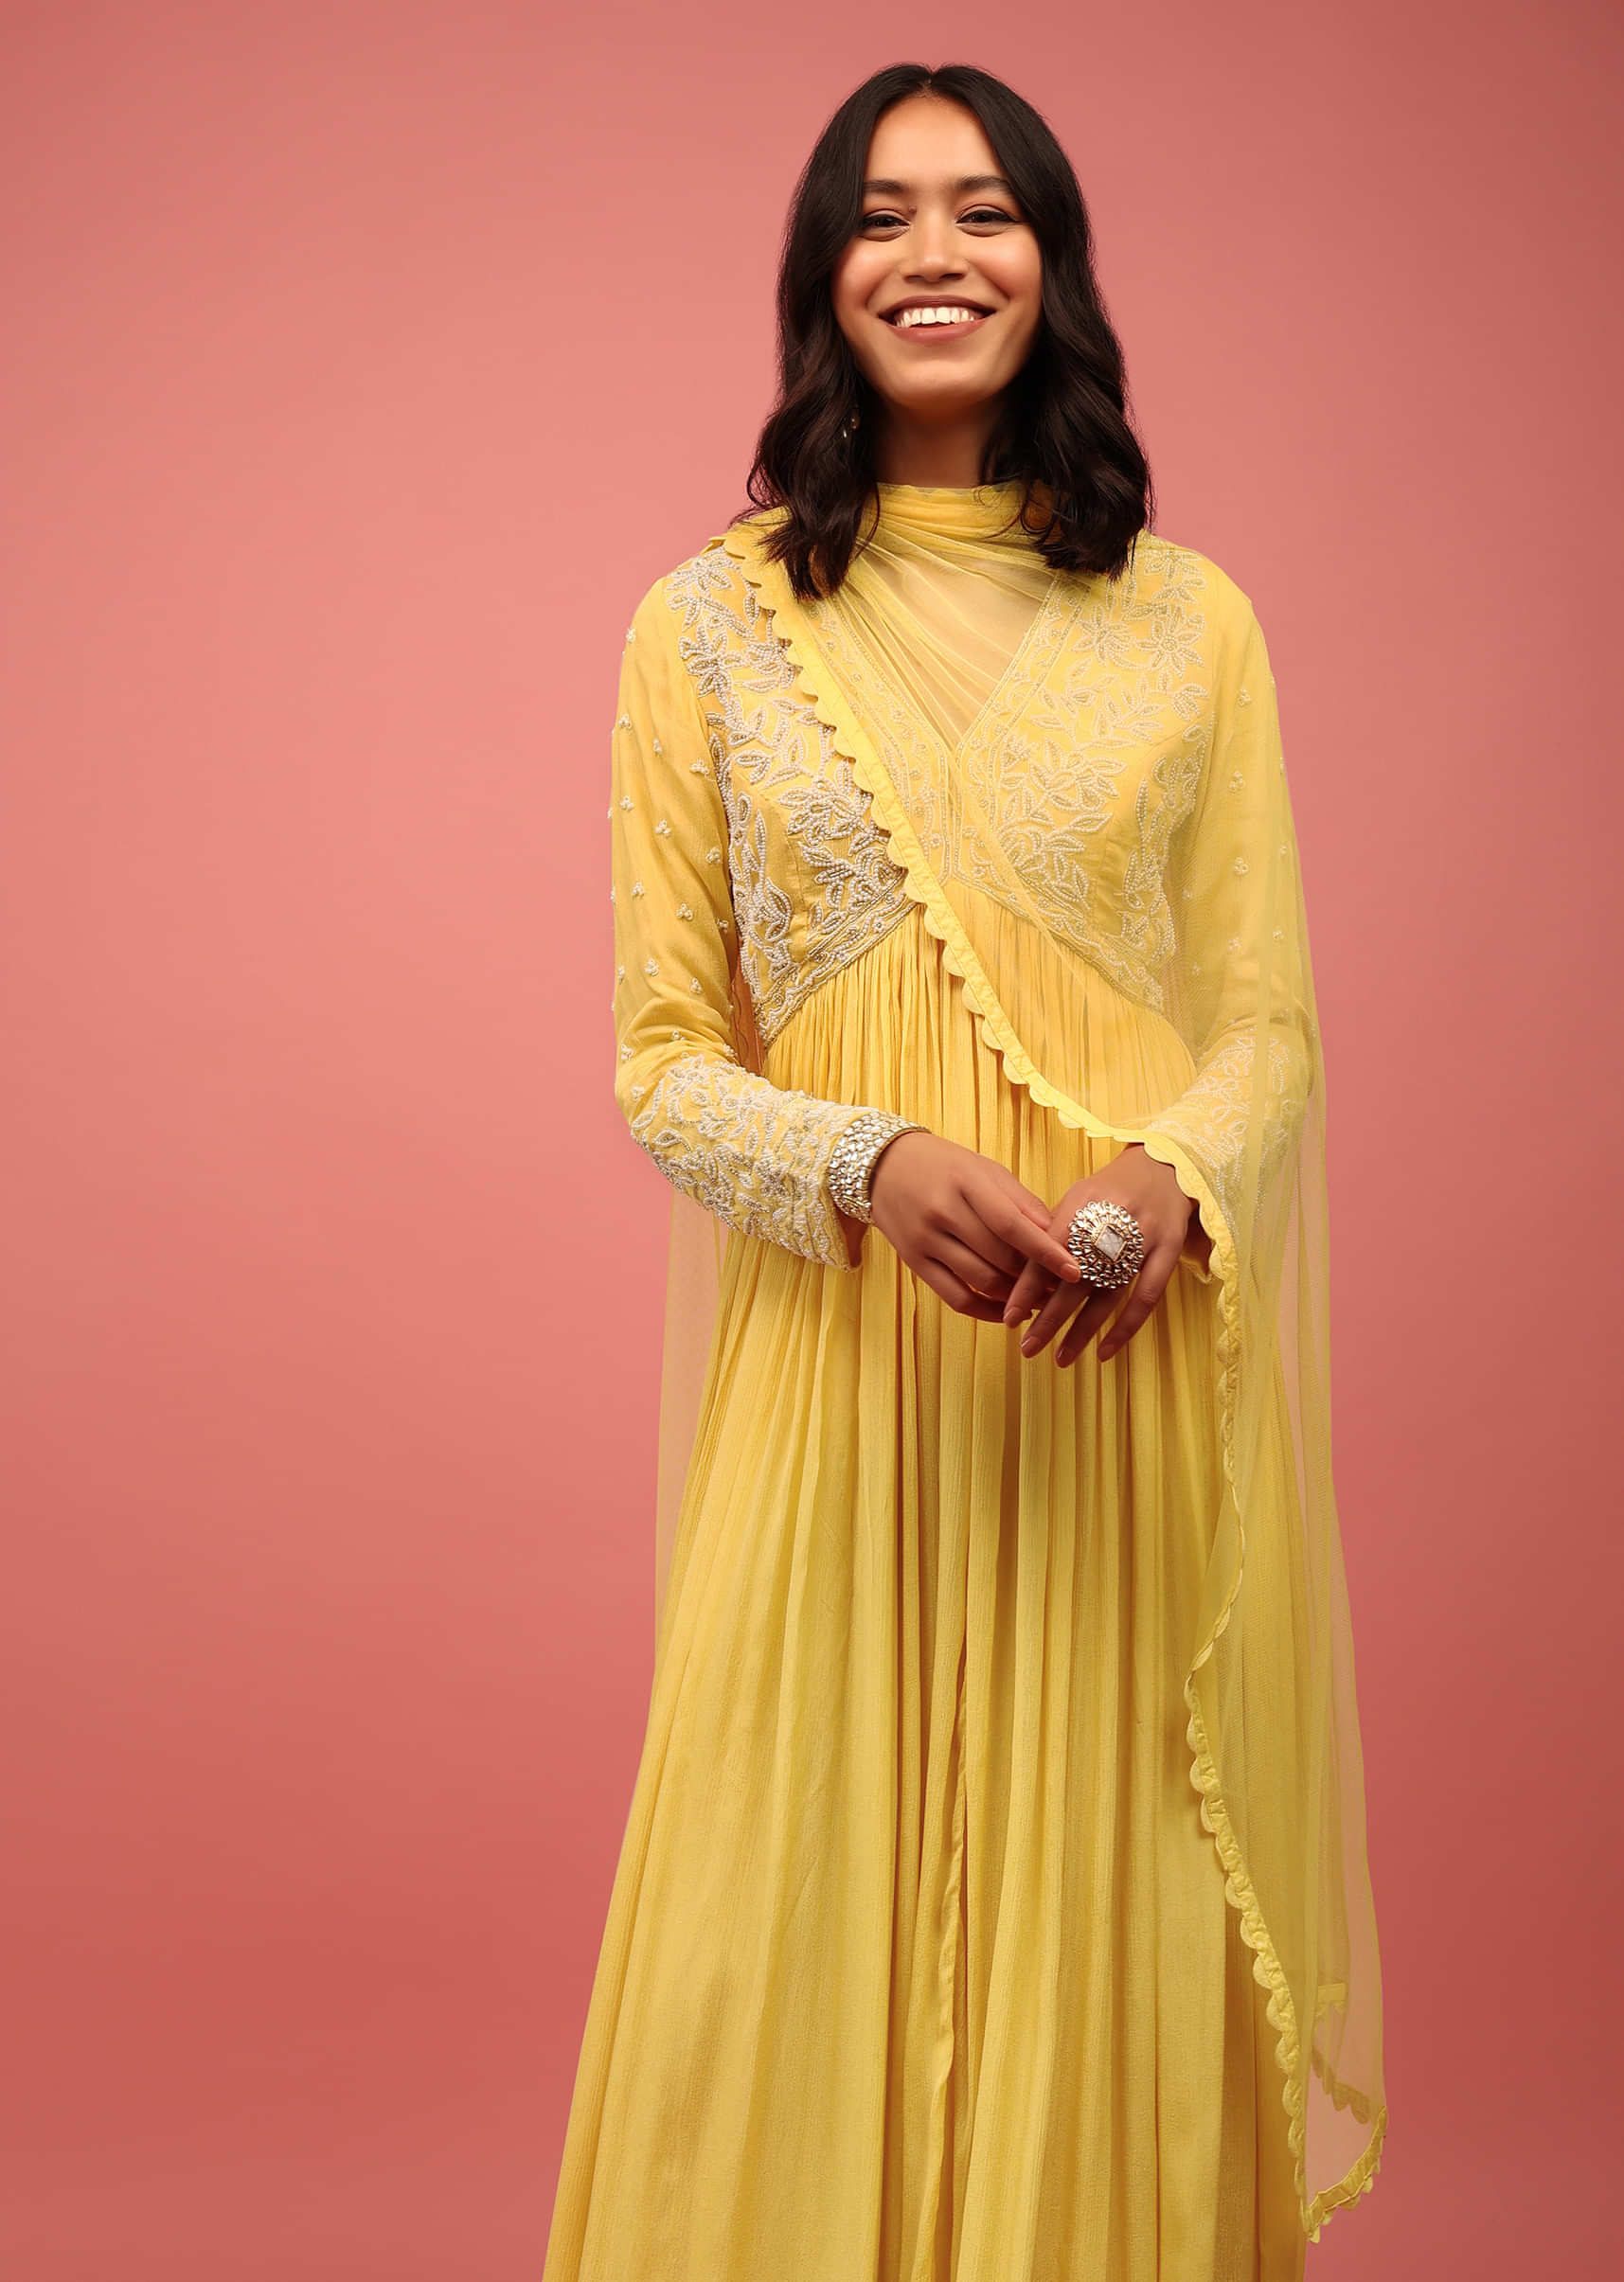 Daffodil Yellow Embroidered Anarkali Suit In Chiffon